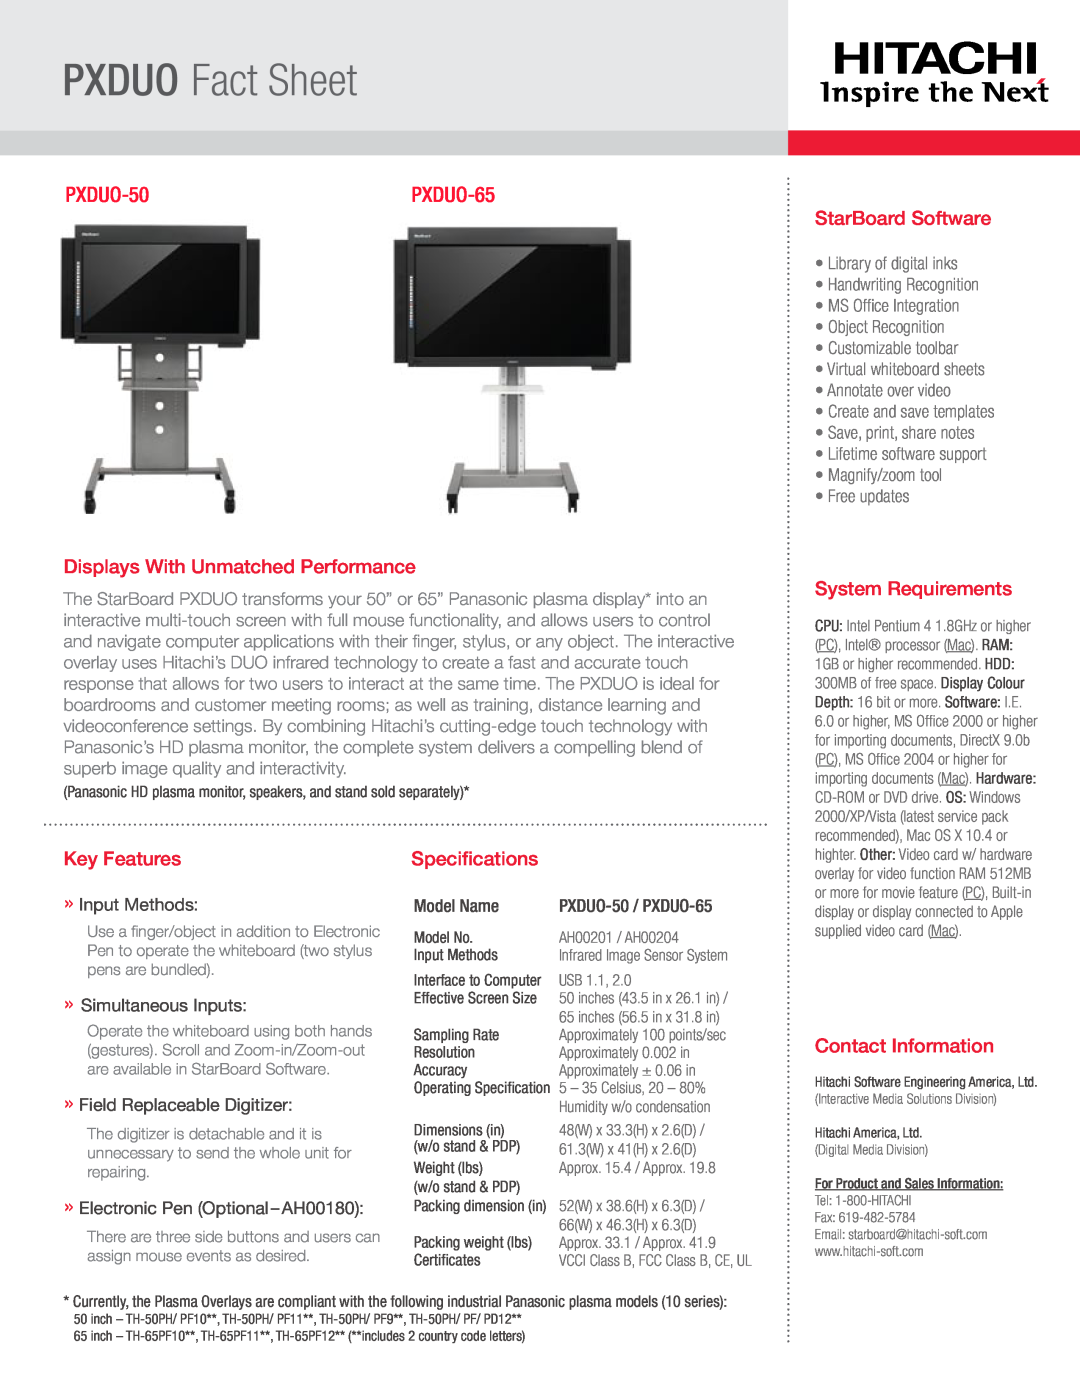 Hitachi PXDUO-50 specifications PXDUO Fact Sheet, Displays With Unmatched Performance, StarBoard Software, Key Features 